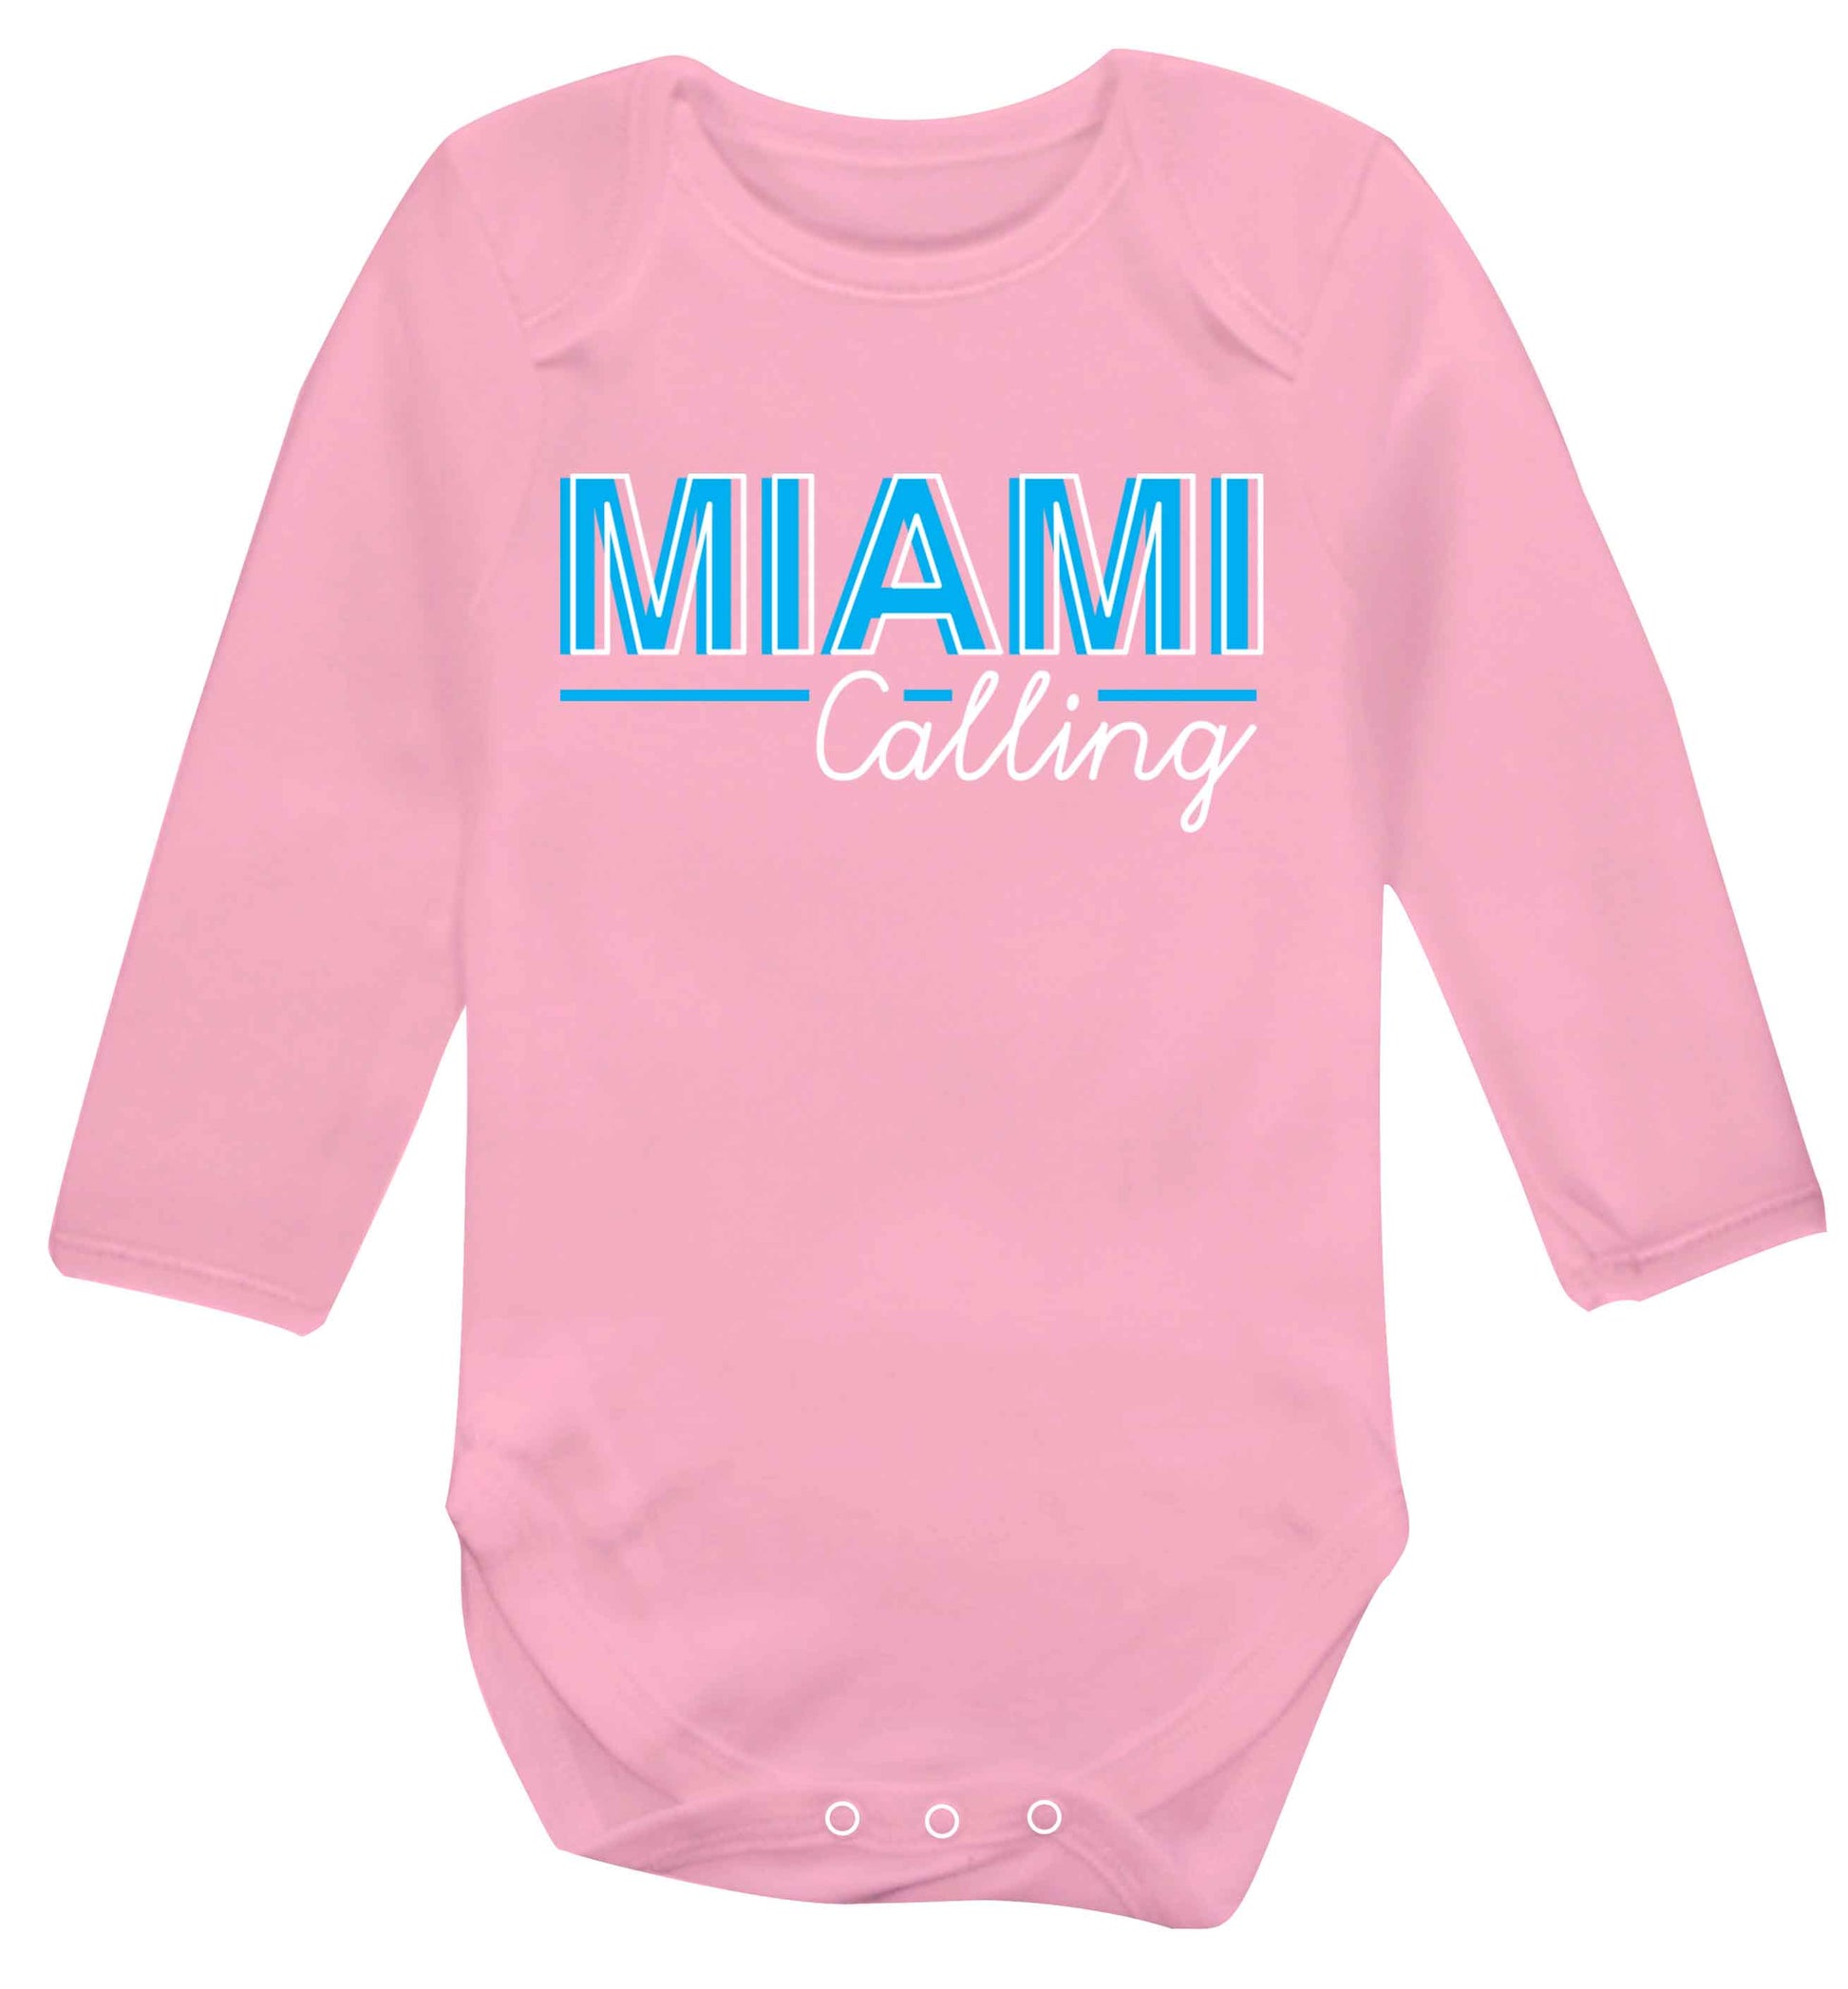 Miami calling Baby Vest long sleeved pale pink 6-12 months